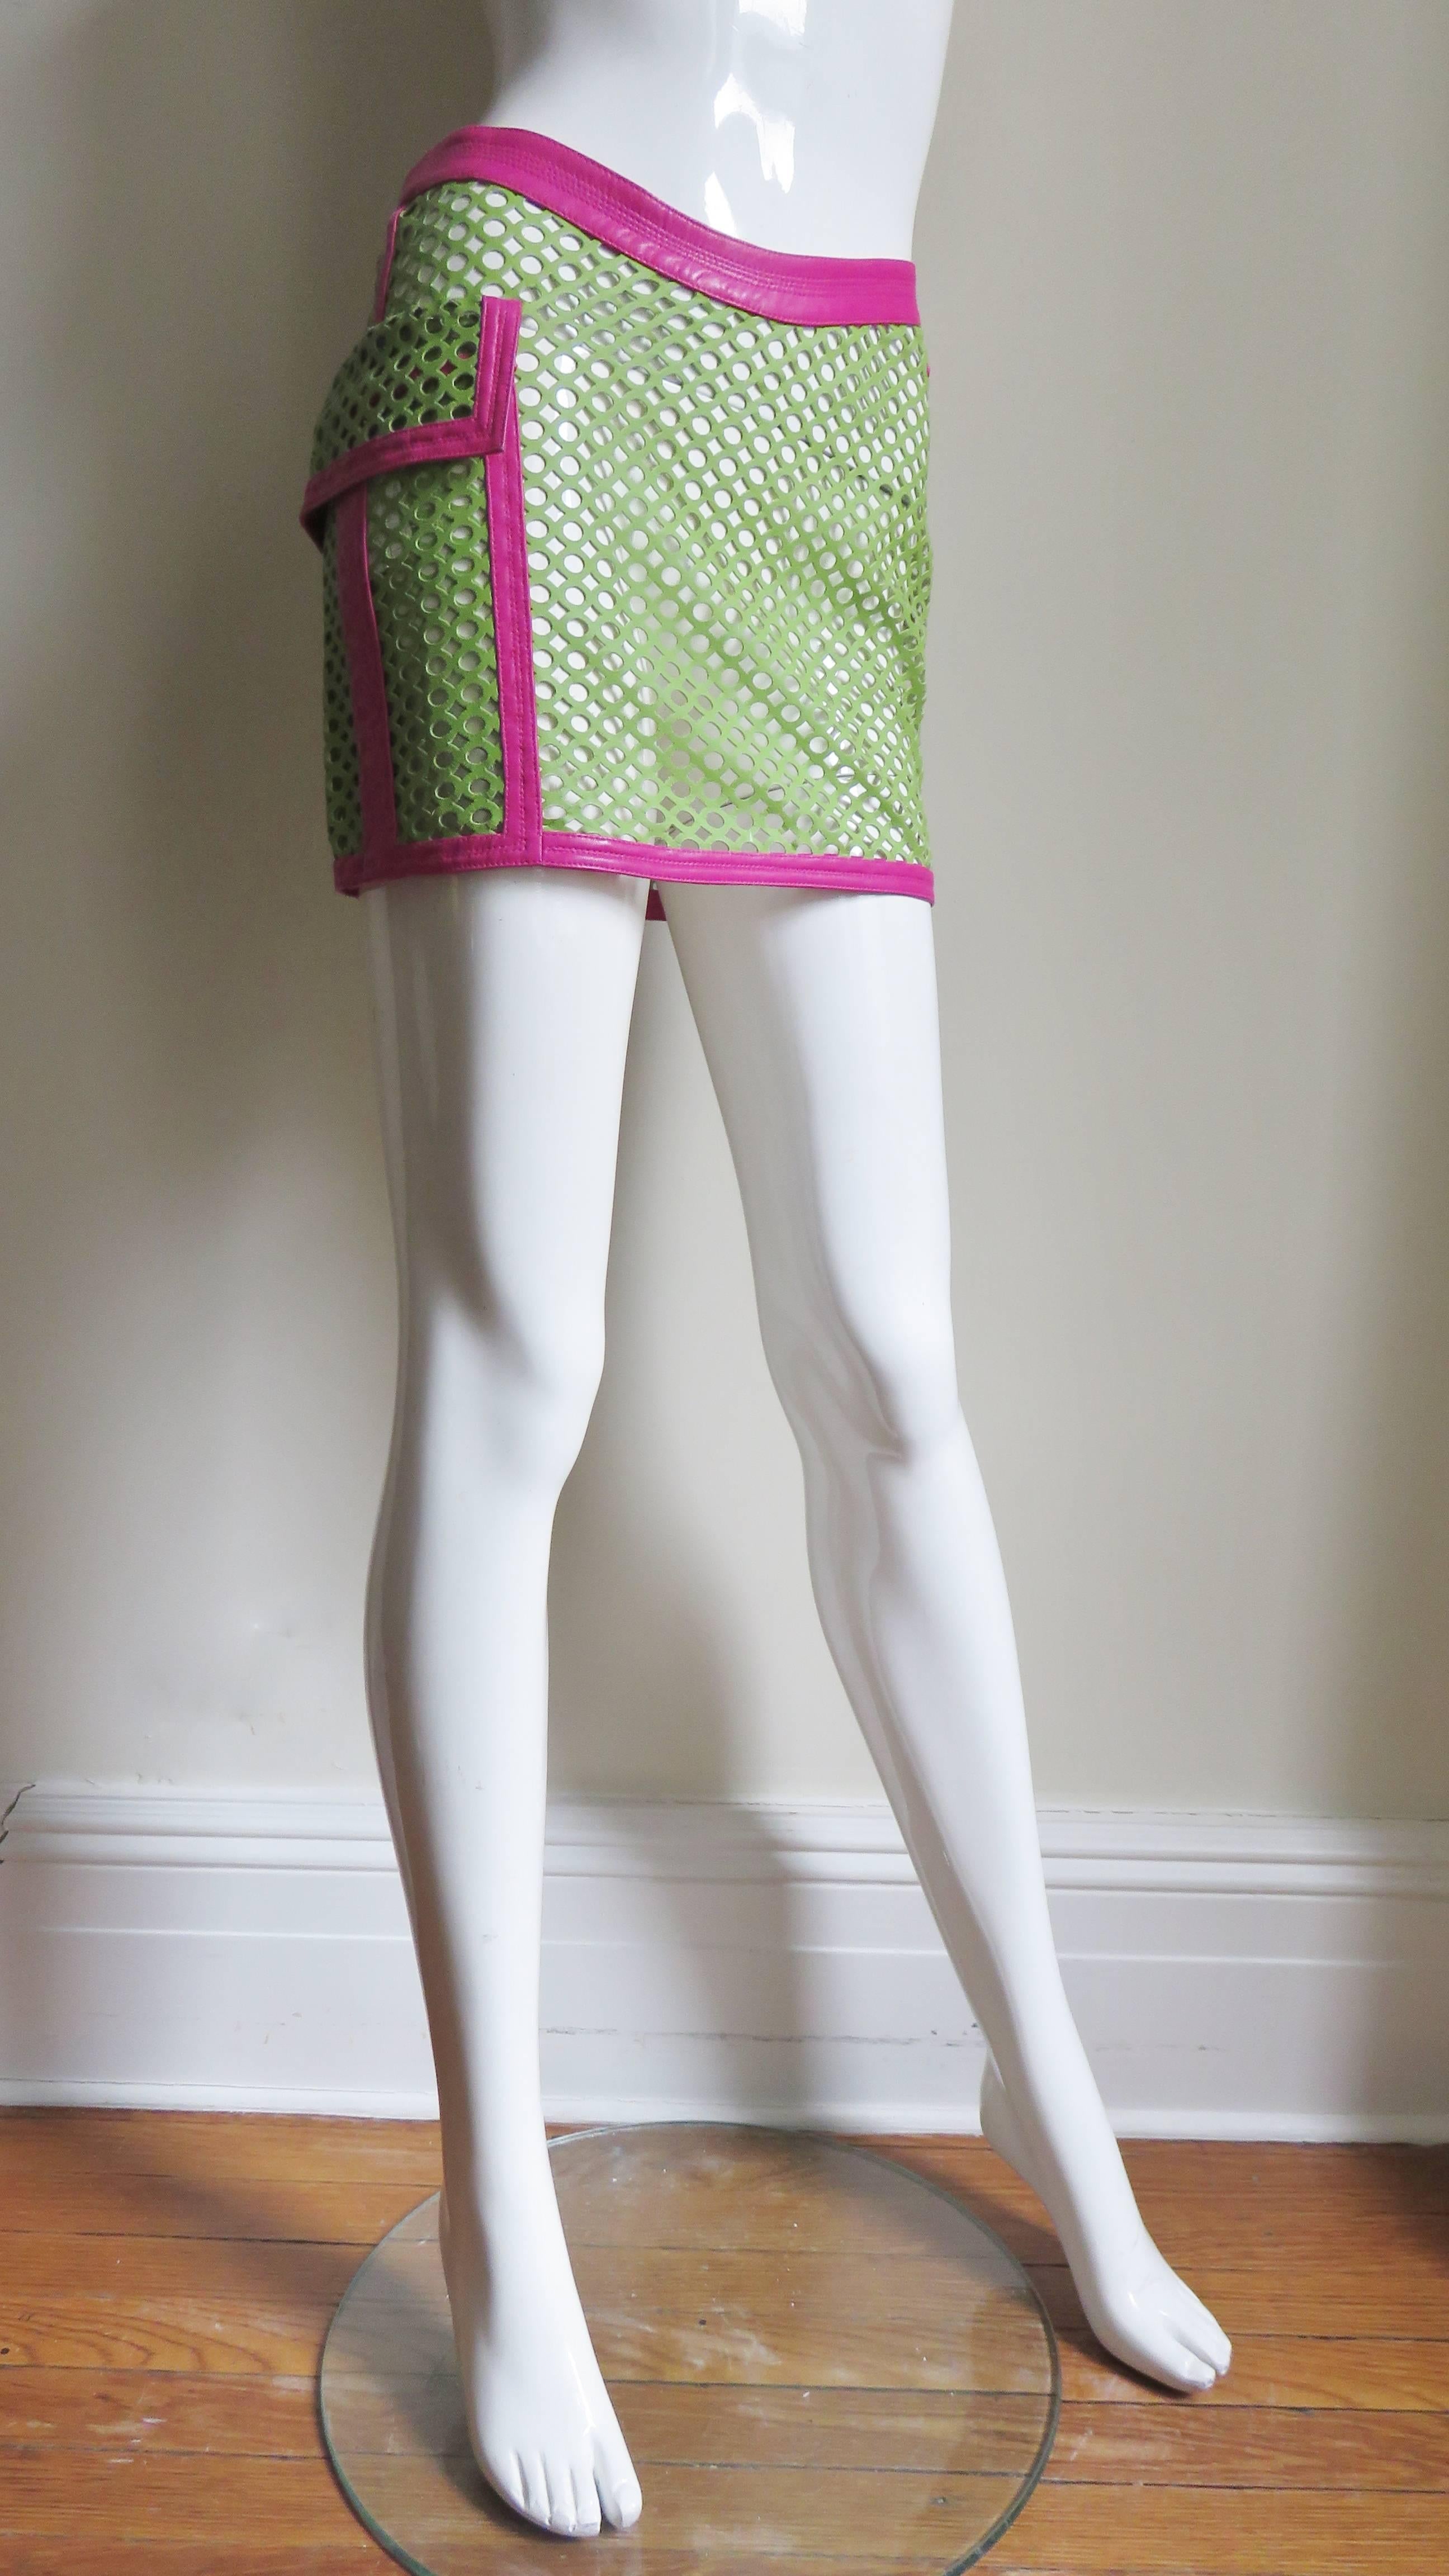  Gianni Versace New Perforated Leather Color Block Mini Skirt 1990s In Excellent Condition For Sale In Water Mill, NY